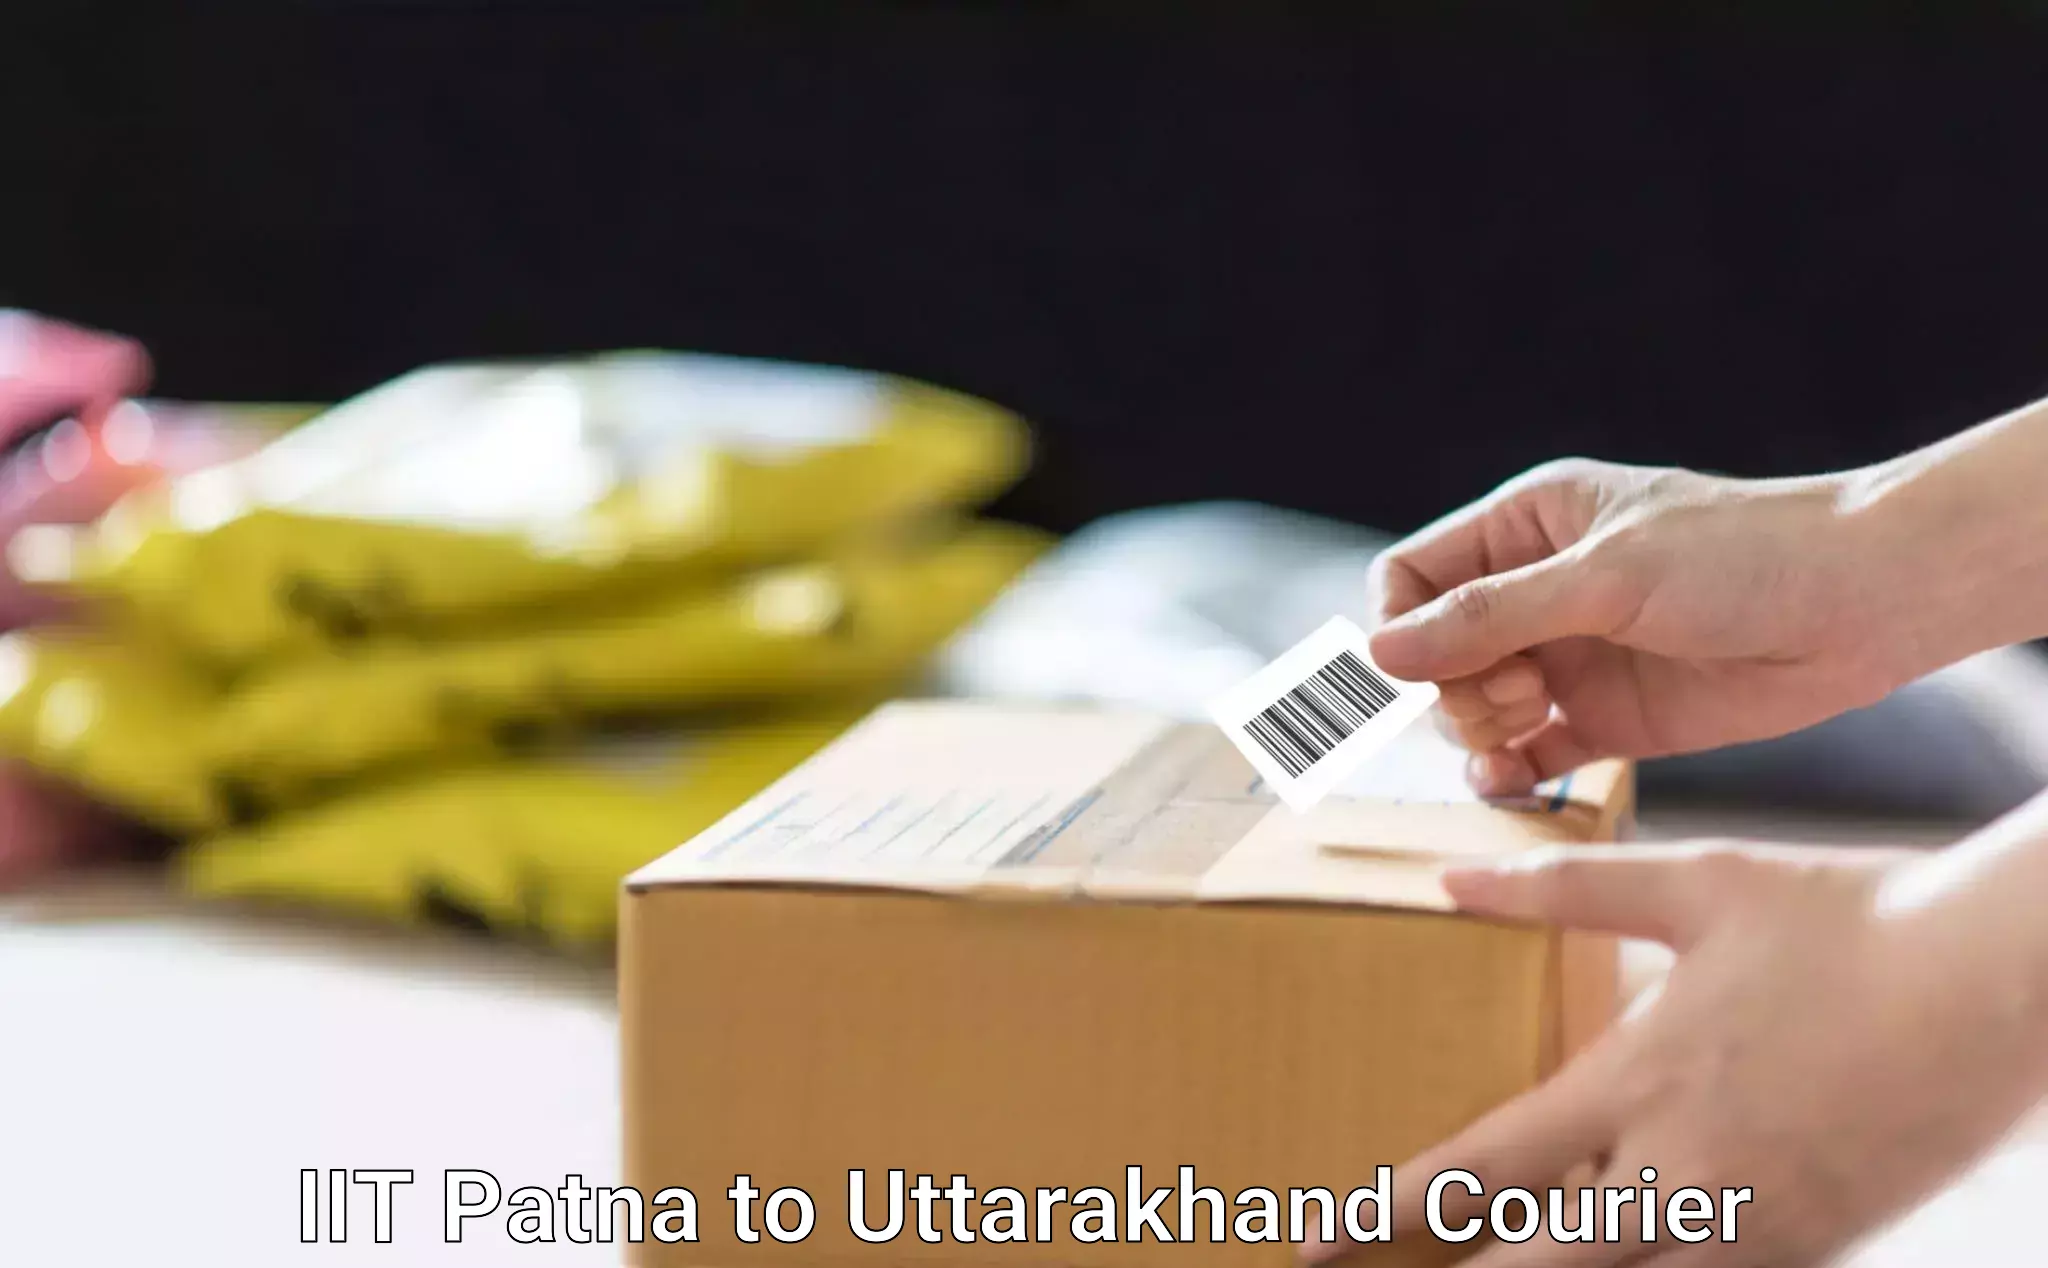 Furniture relocation services IIT Patna to Uttarakhand